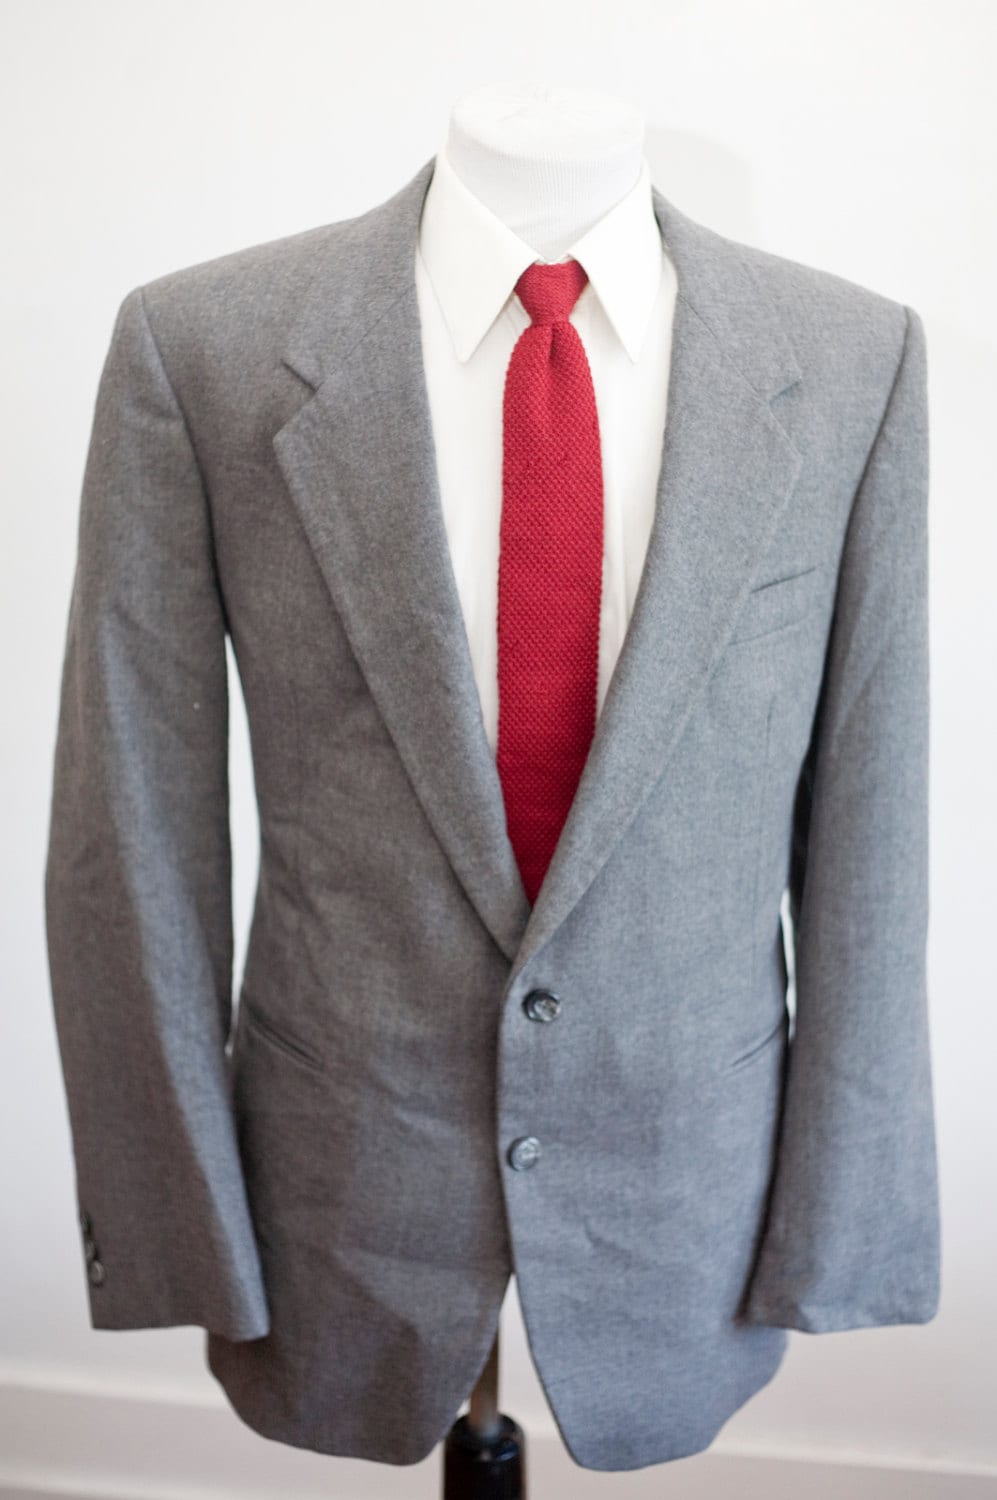 Men's Blazer and Trousers / Vintage Grey Wool Suit by JJ - Etsy